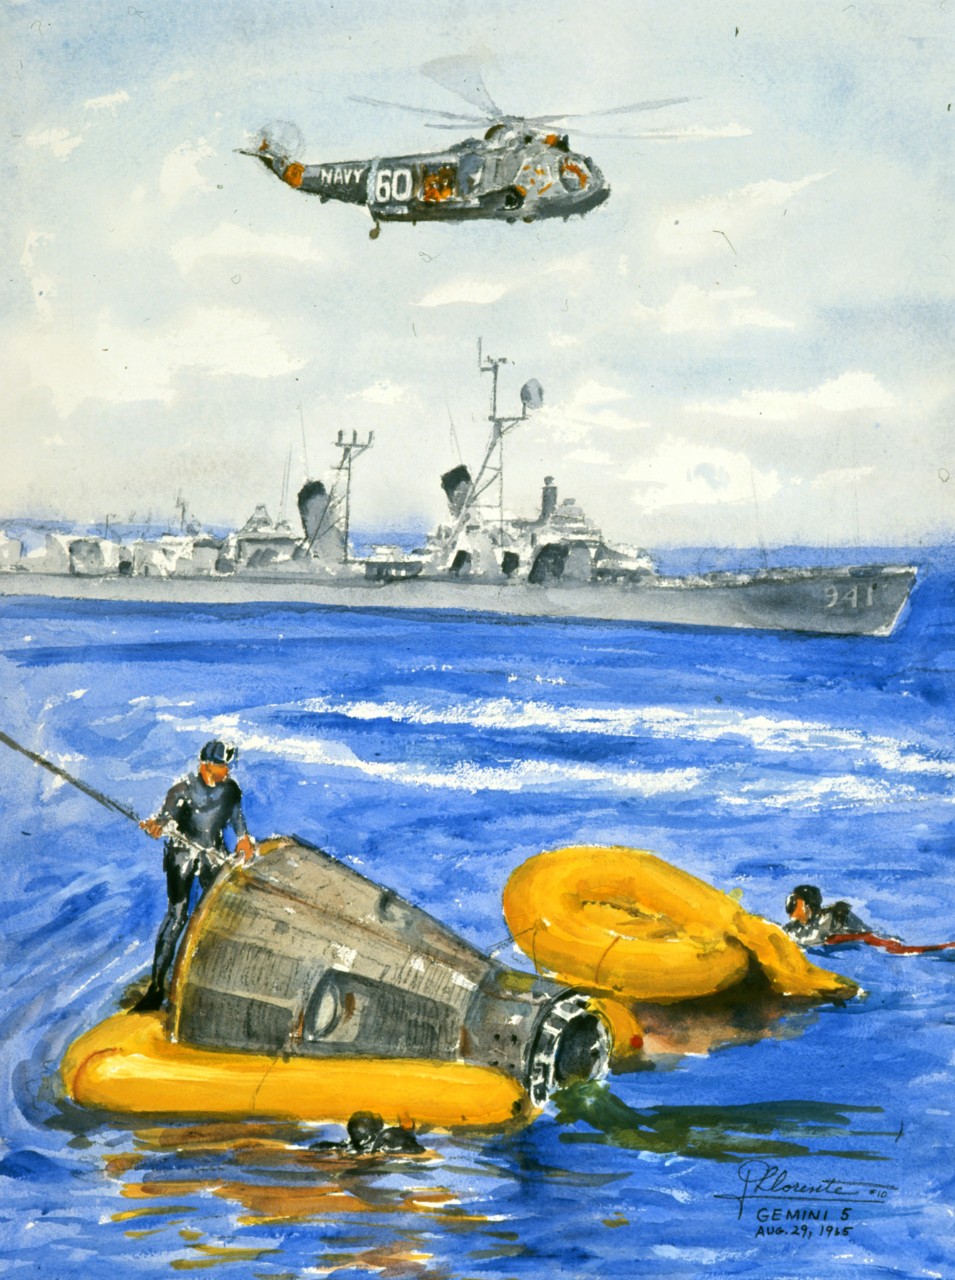 The recovery of a space capsule with a ship in the background and a helicopter flying over head